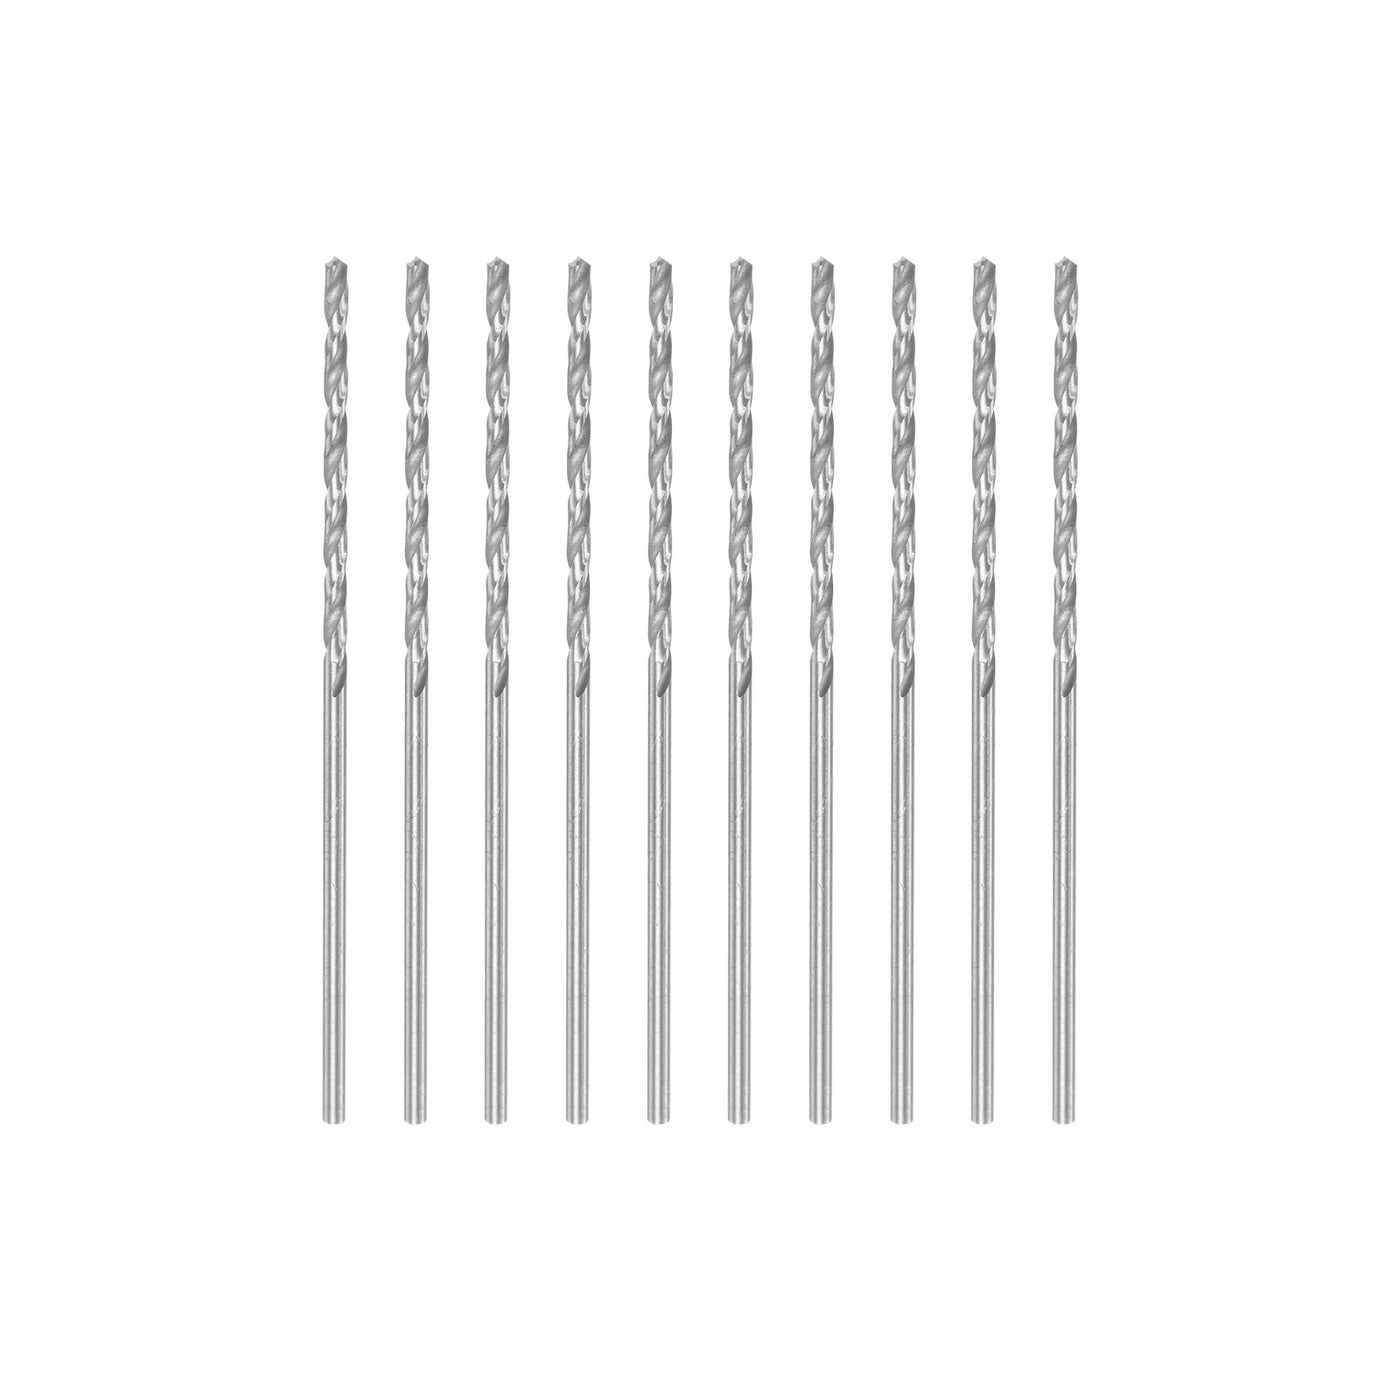 uxcell Uxcell 10 Pcs 1.25mm High Speed Steel Drill Bits, Fully Ground 46mm Length Drill Bit